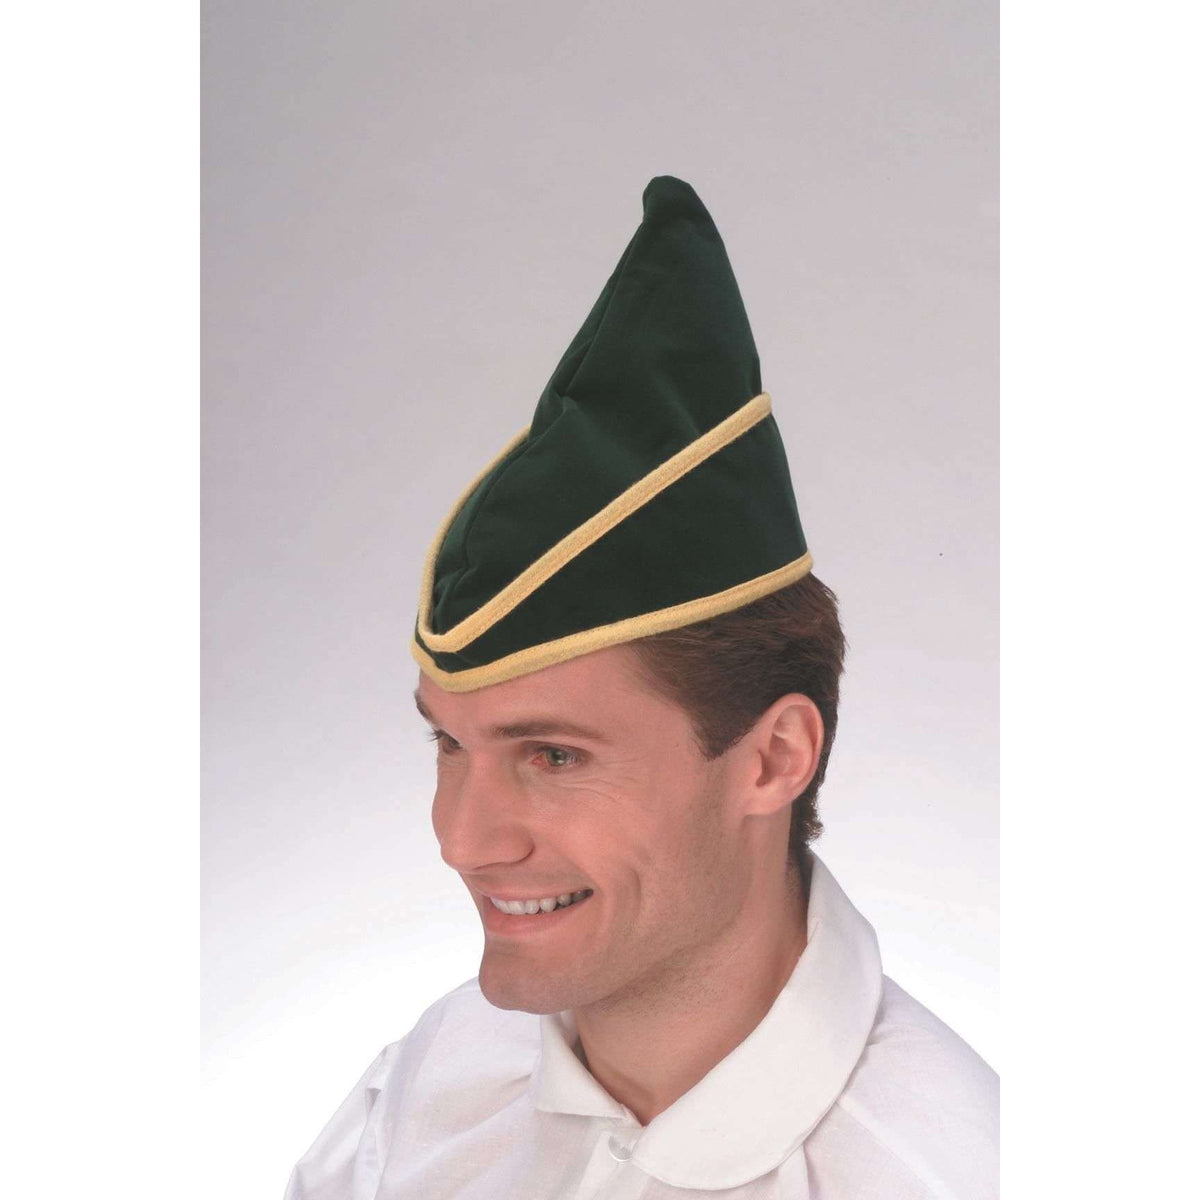 Green Elf Hat with Yellow Trim